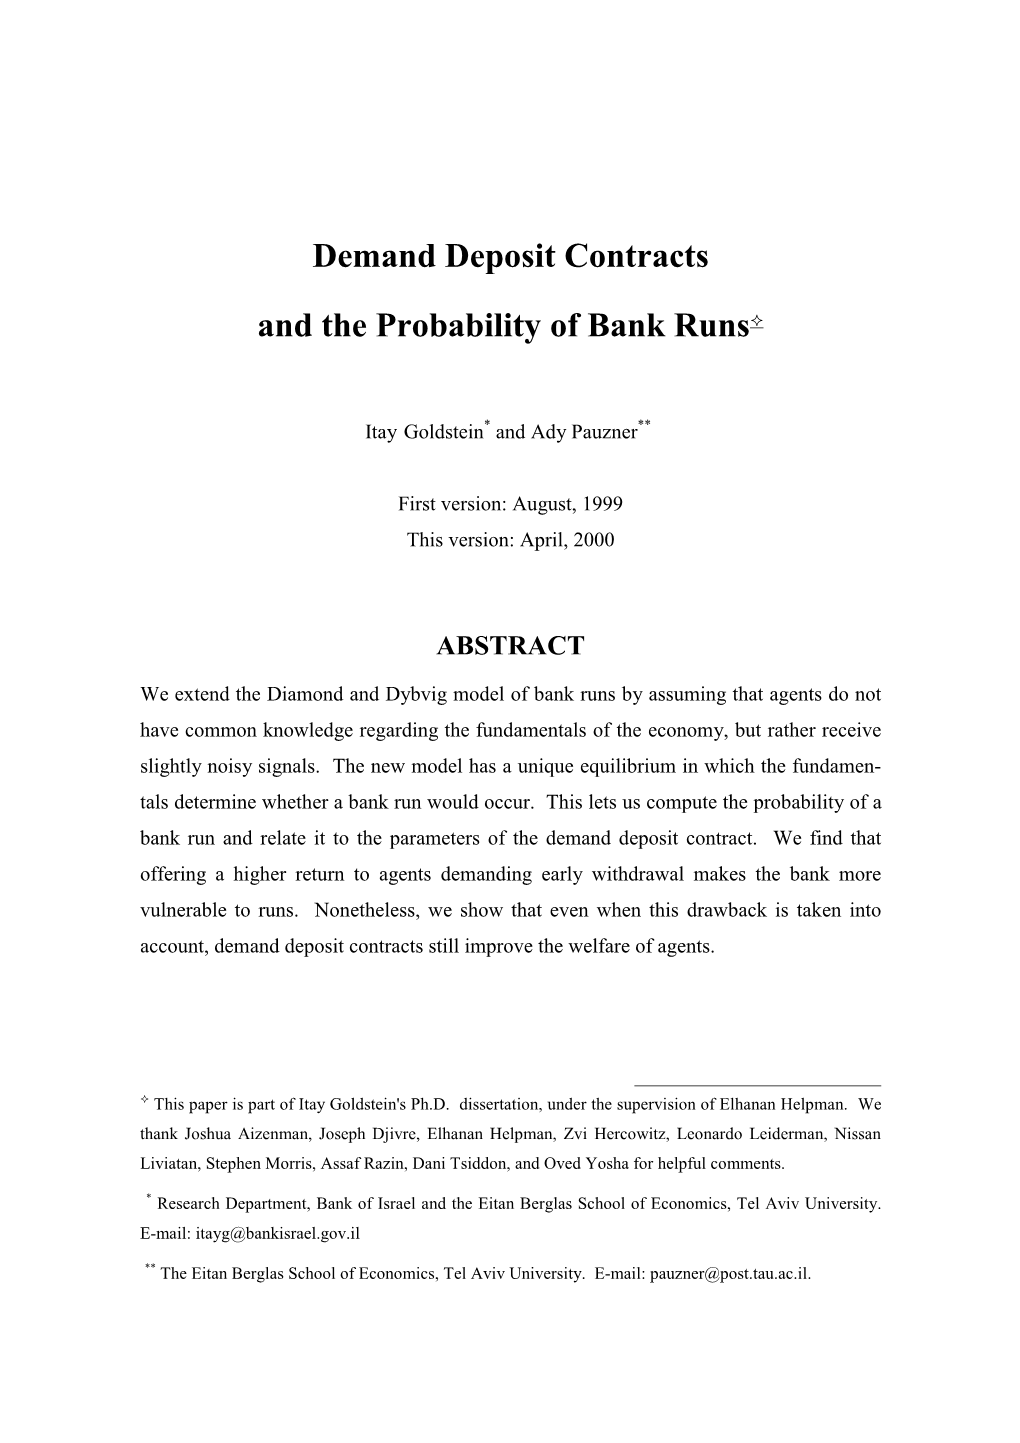 Demand Deposit Contracts and the Probability of Bank Runs